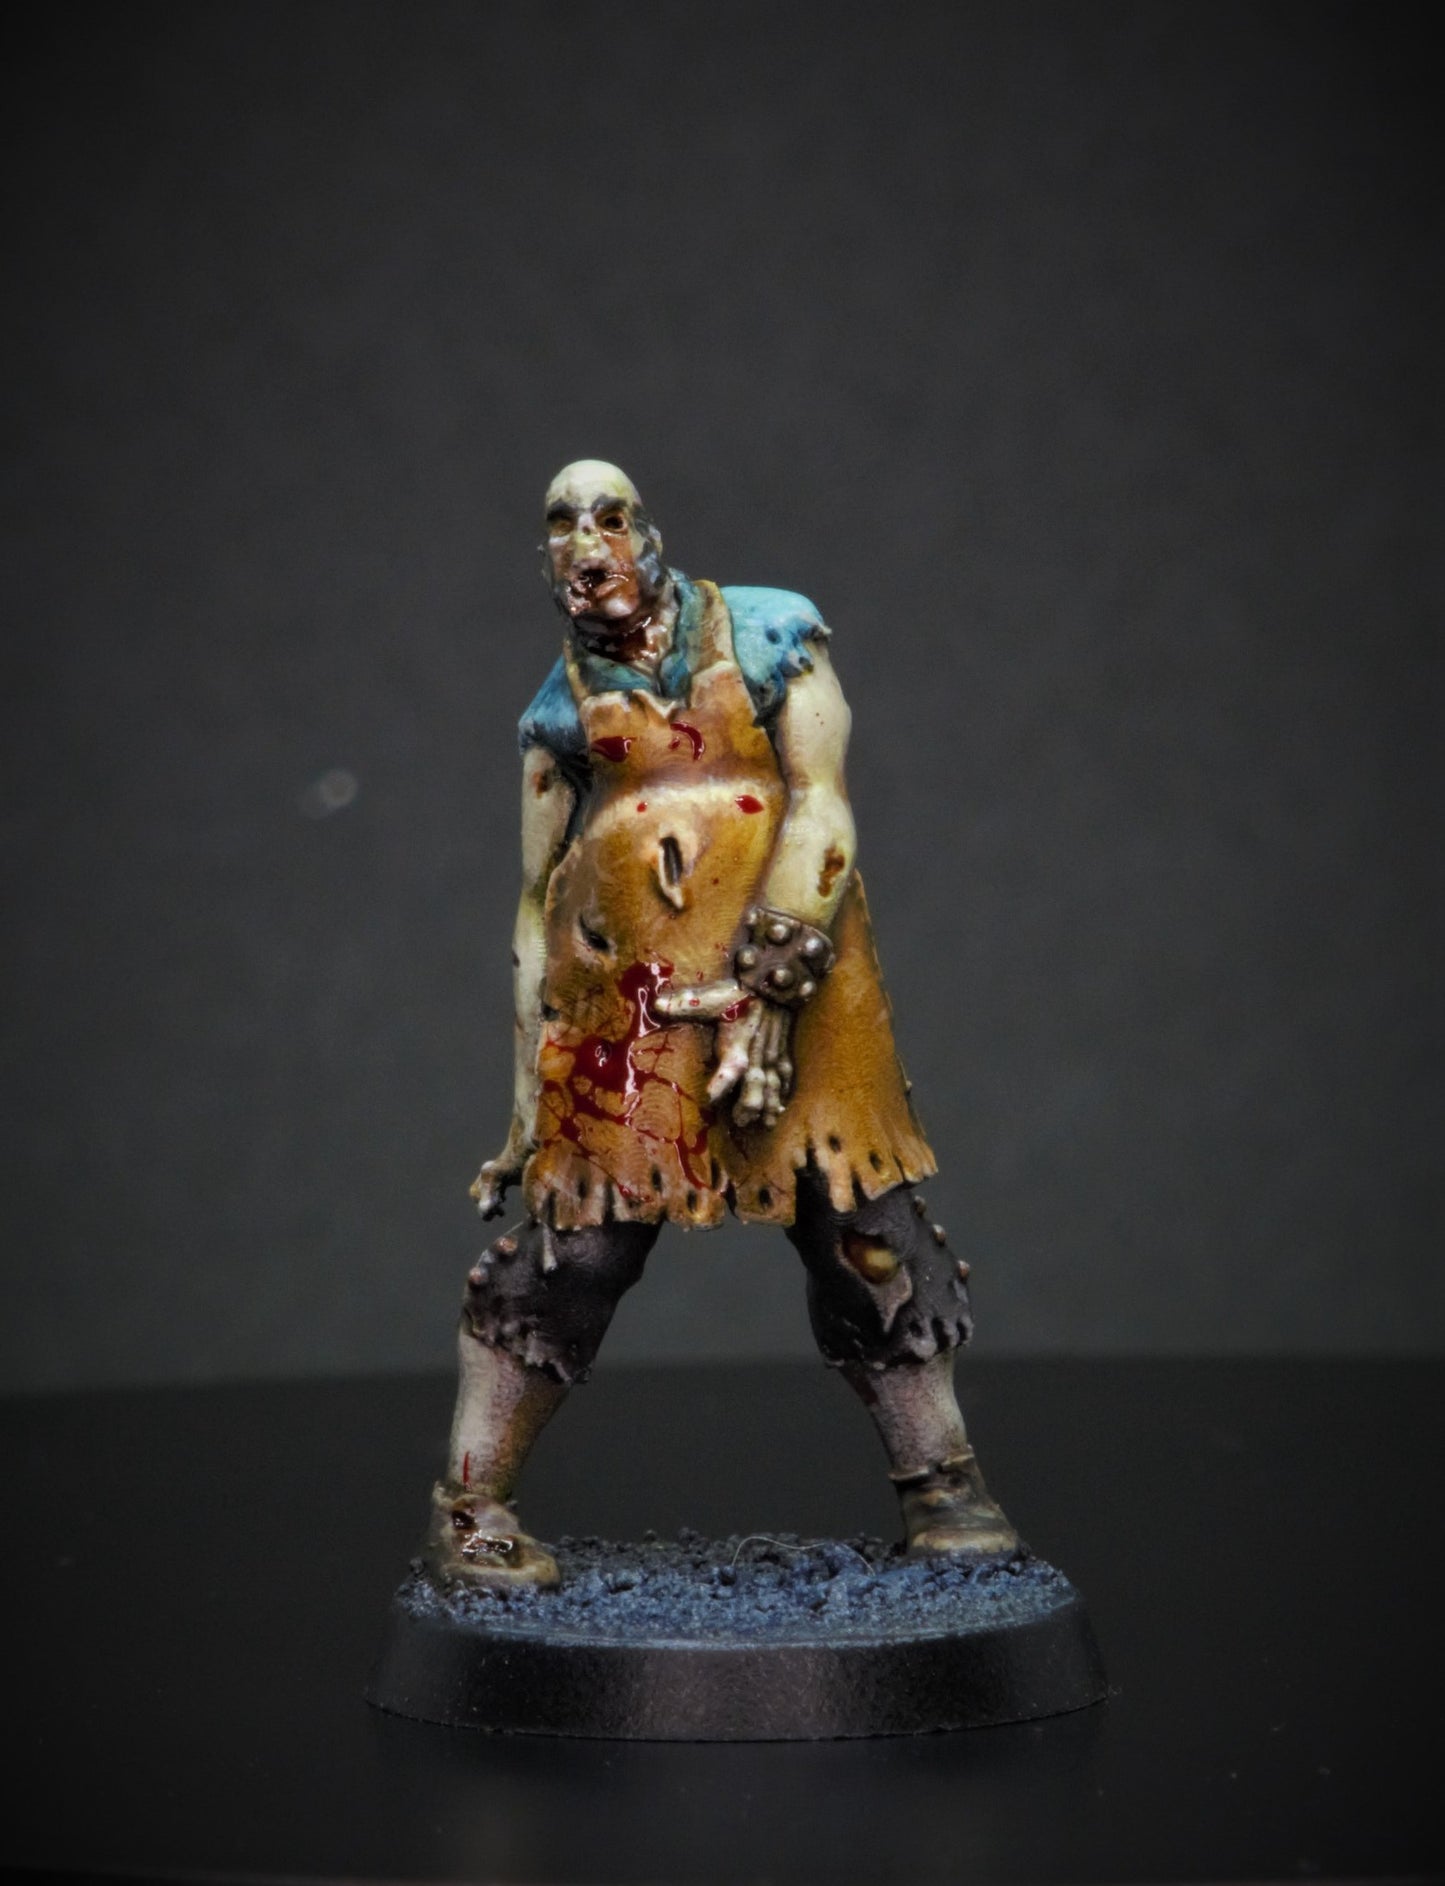 RPG/Tabletop Gaming Miniature - Zombie Smithy - Unpainted